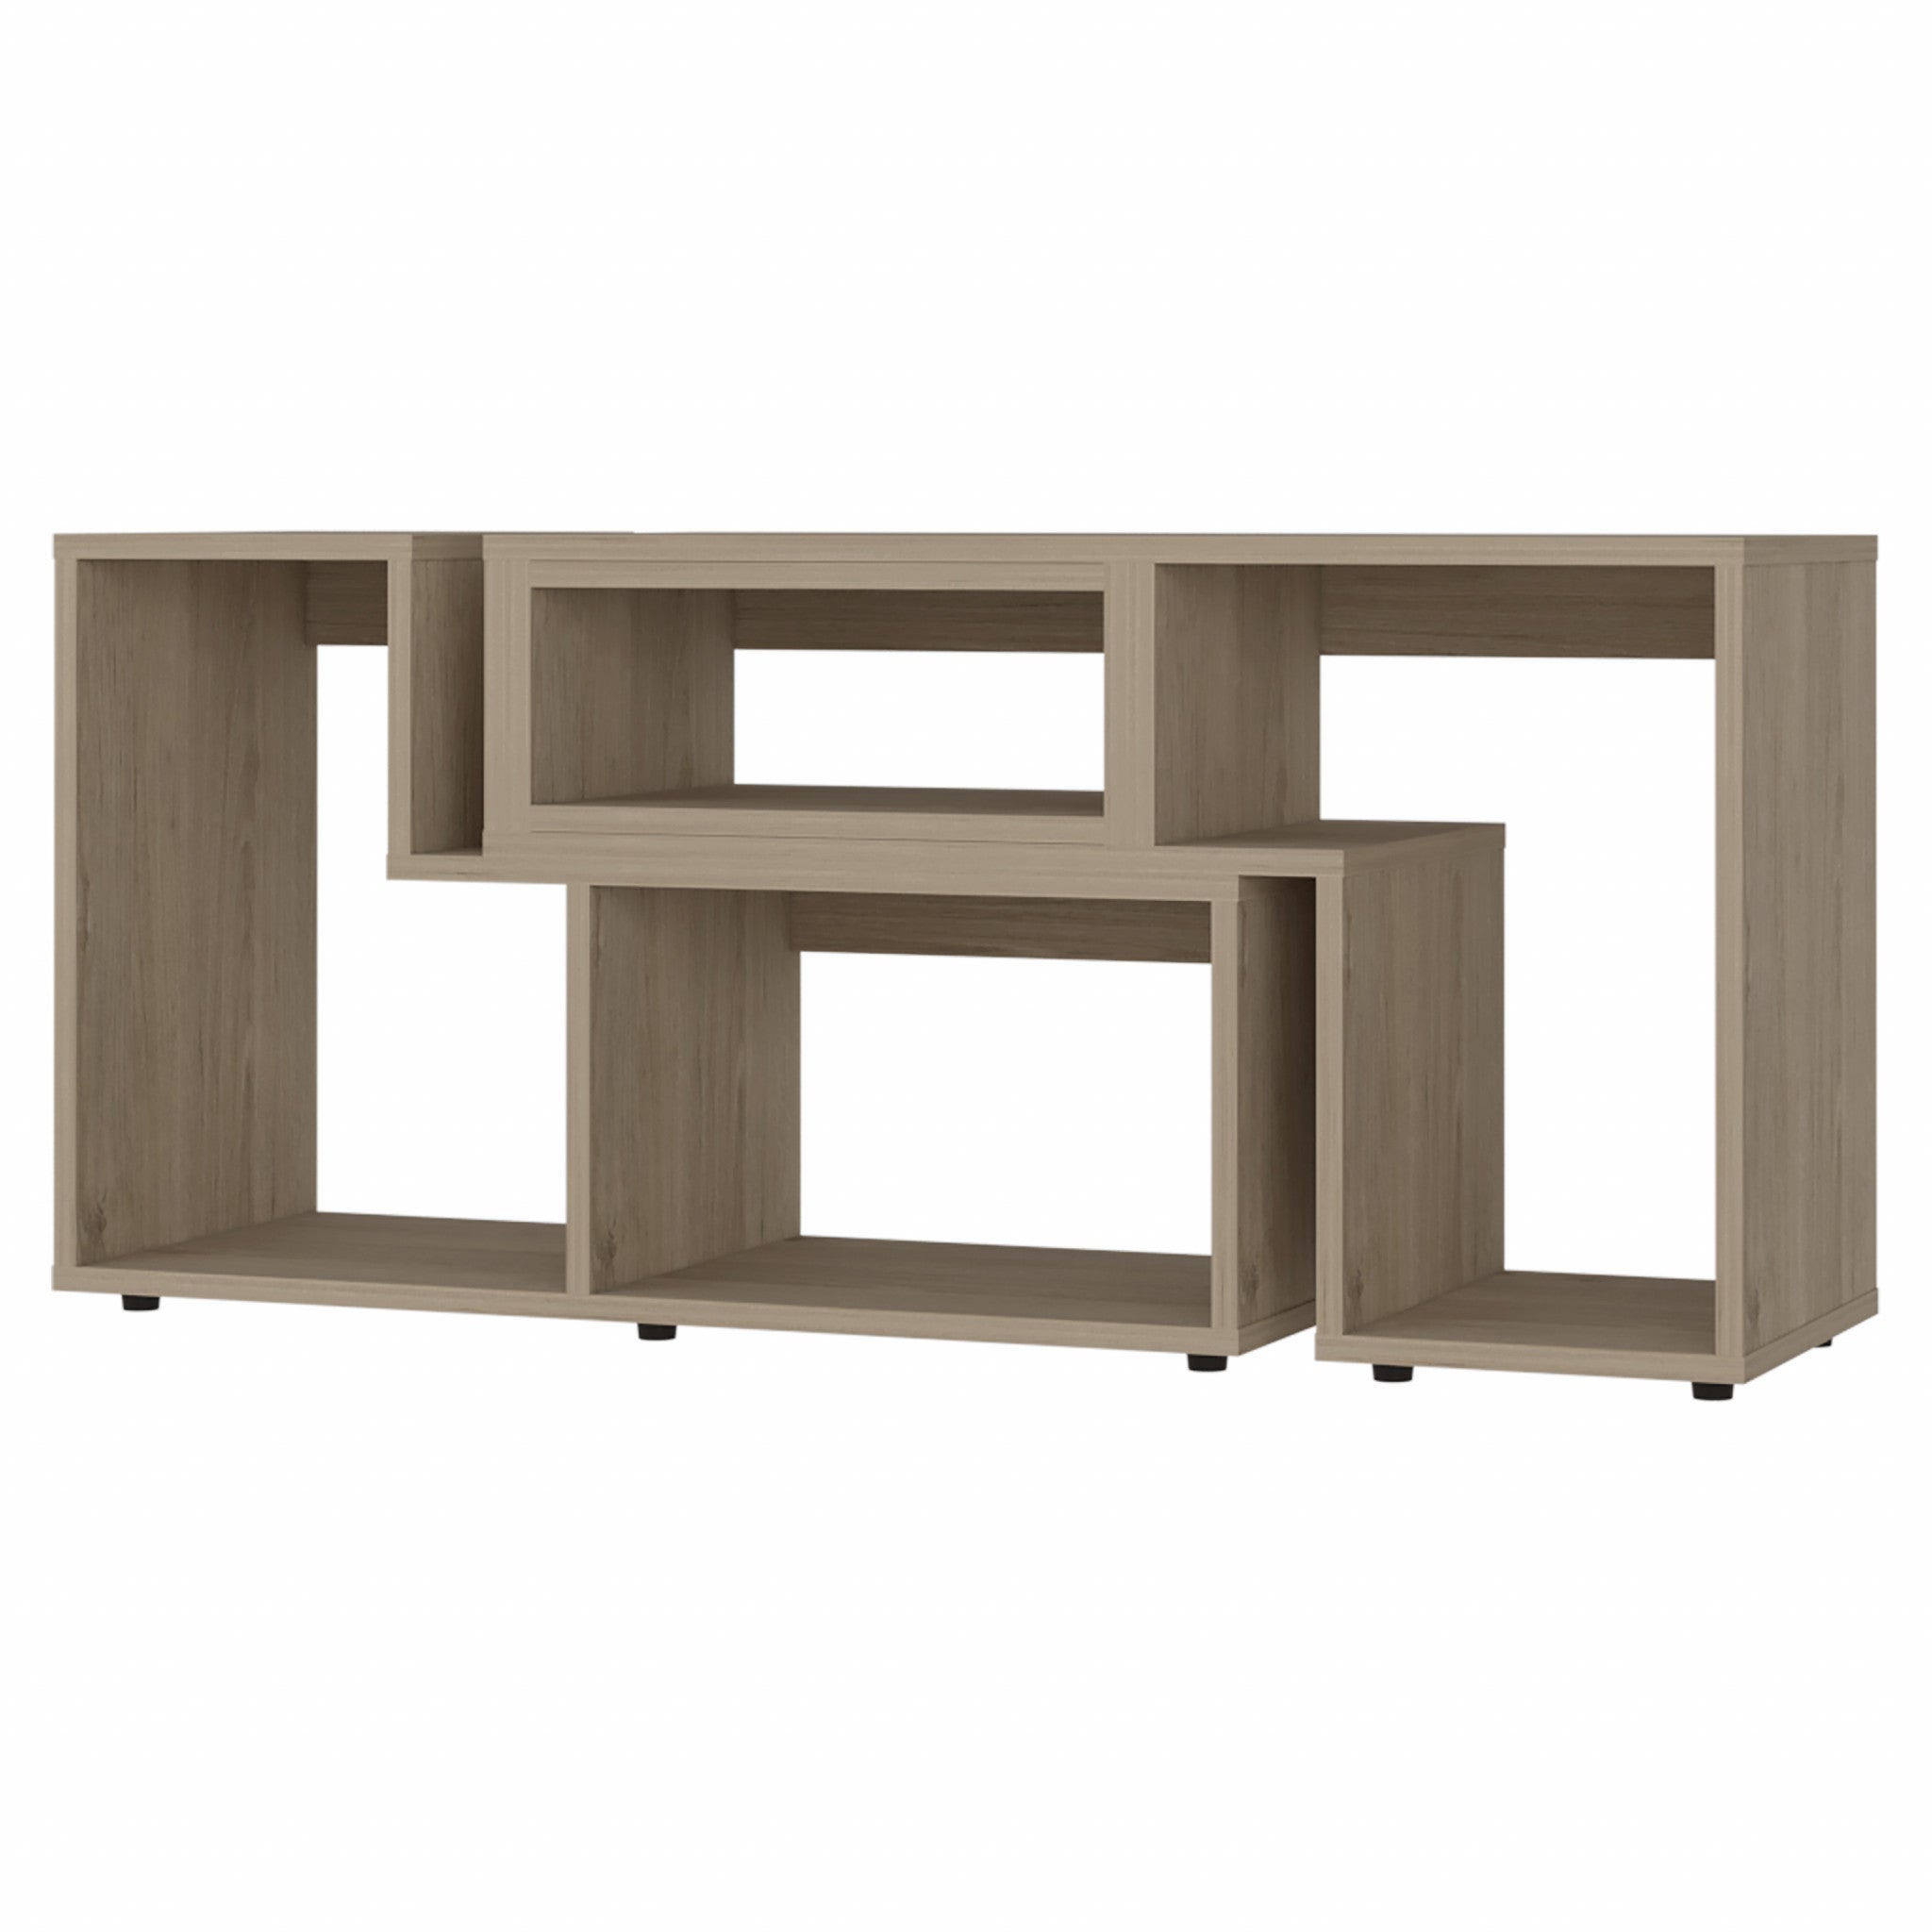 63" Wood Brown Particle Board Open Shelving TV Stand